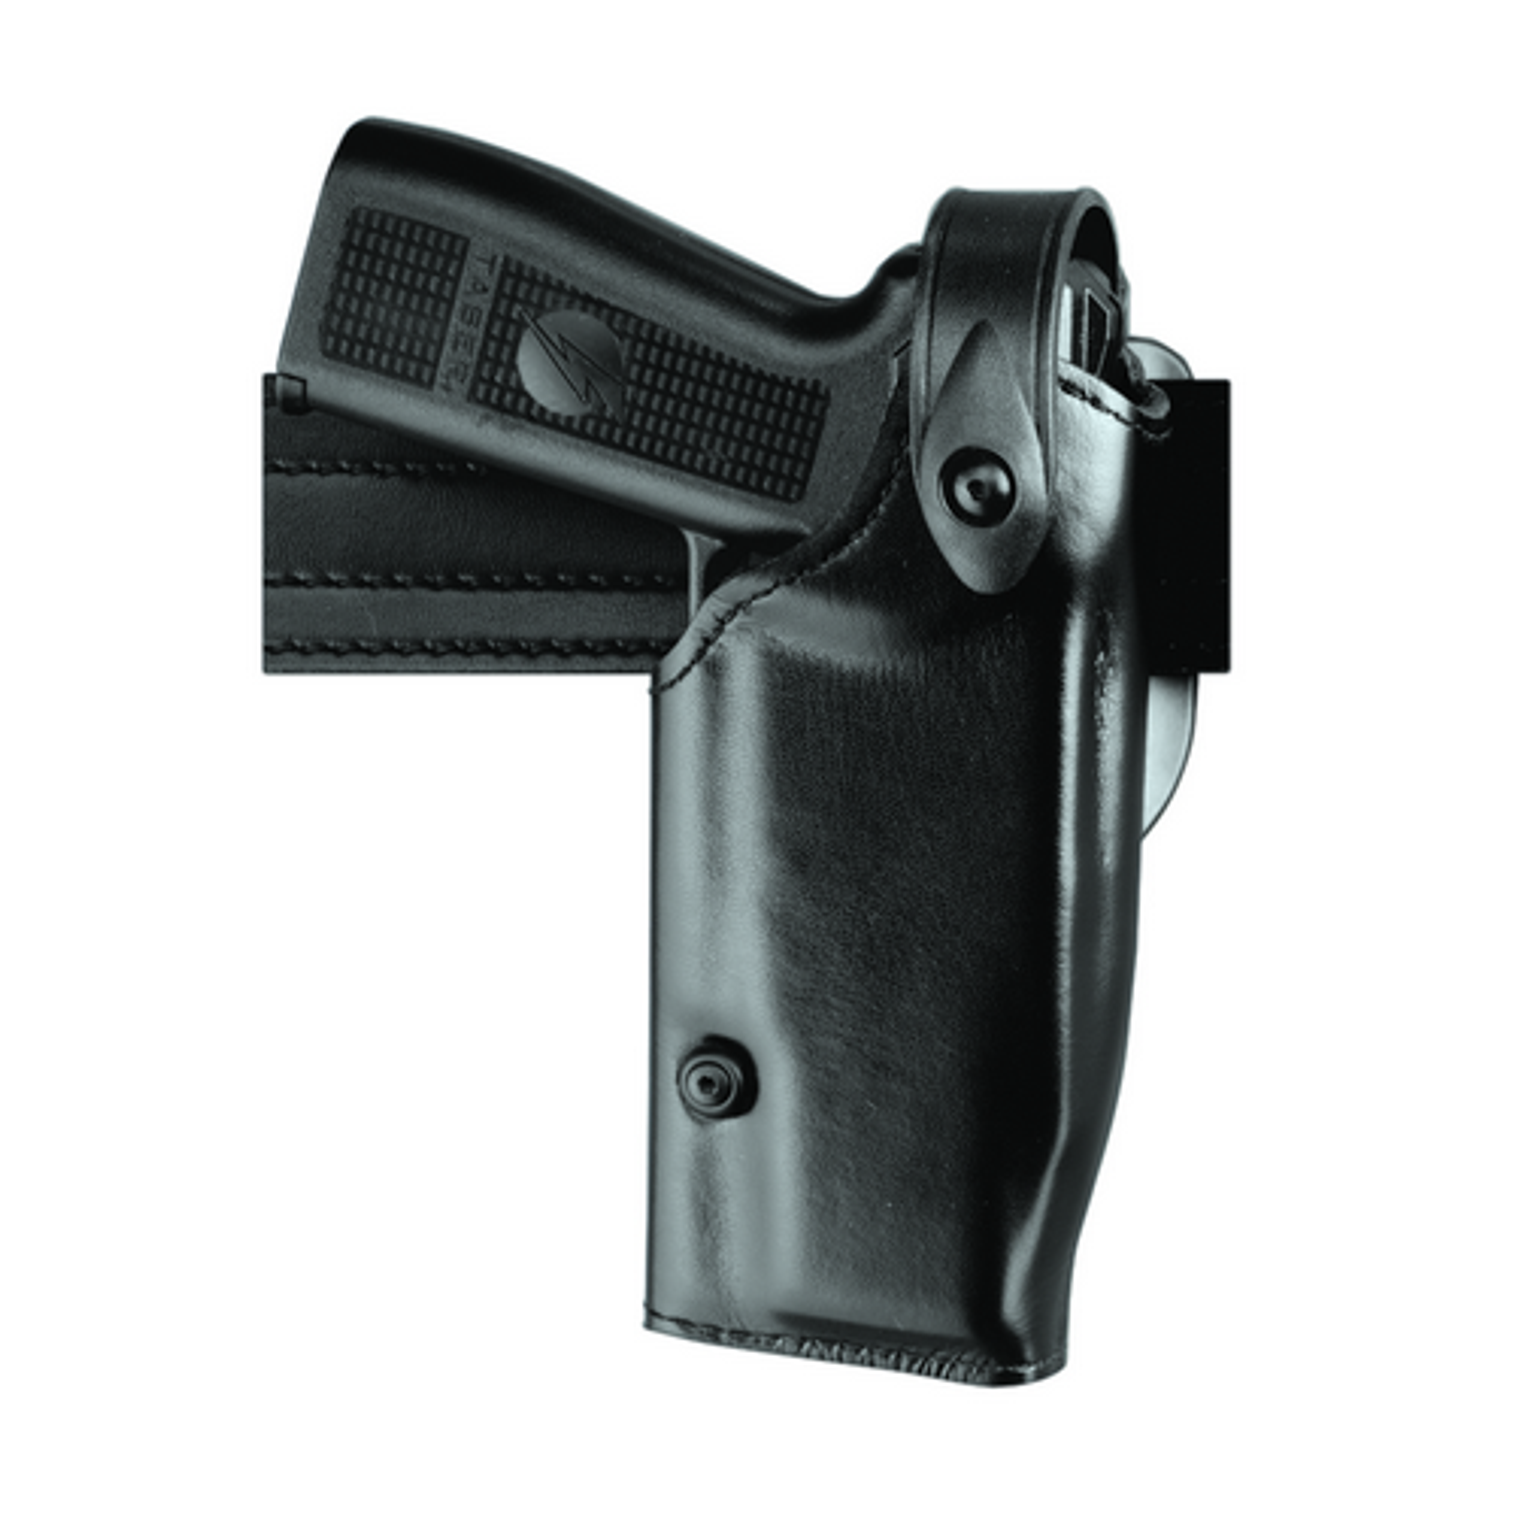 Model 6280 Sls Mid-ride Level Ii Retention Duty Holster For Smith & Wesson M&p 45